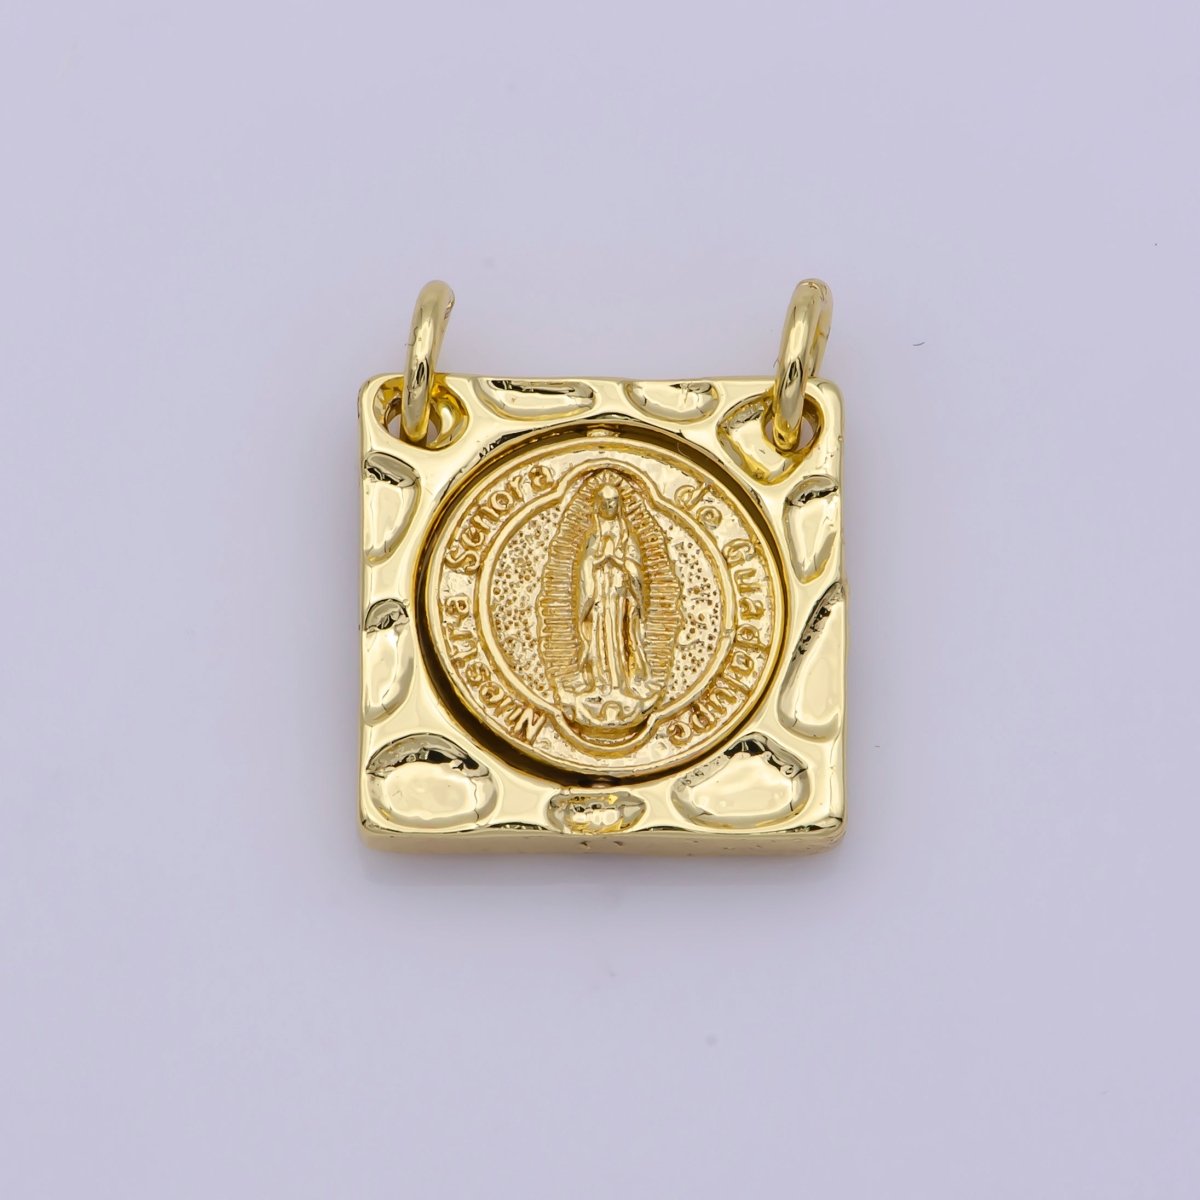 Dainty Vintage Square Lady Guadalupe Charm Religious Medallion Necklace Pendant Virgin Mary for Jewelry Making G-875 - DLUXCA